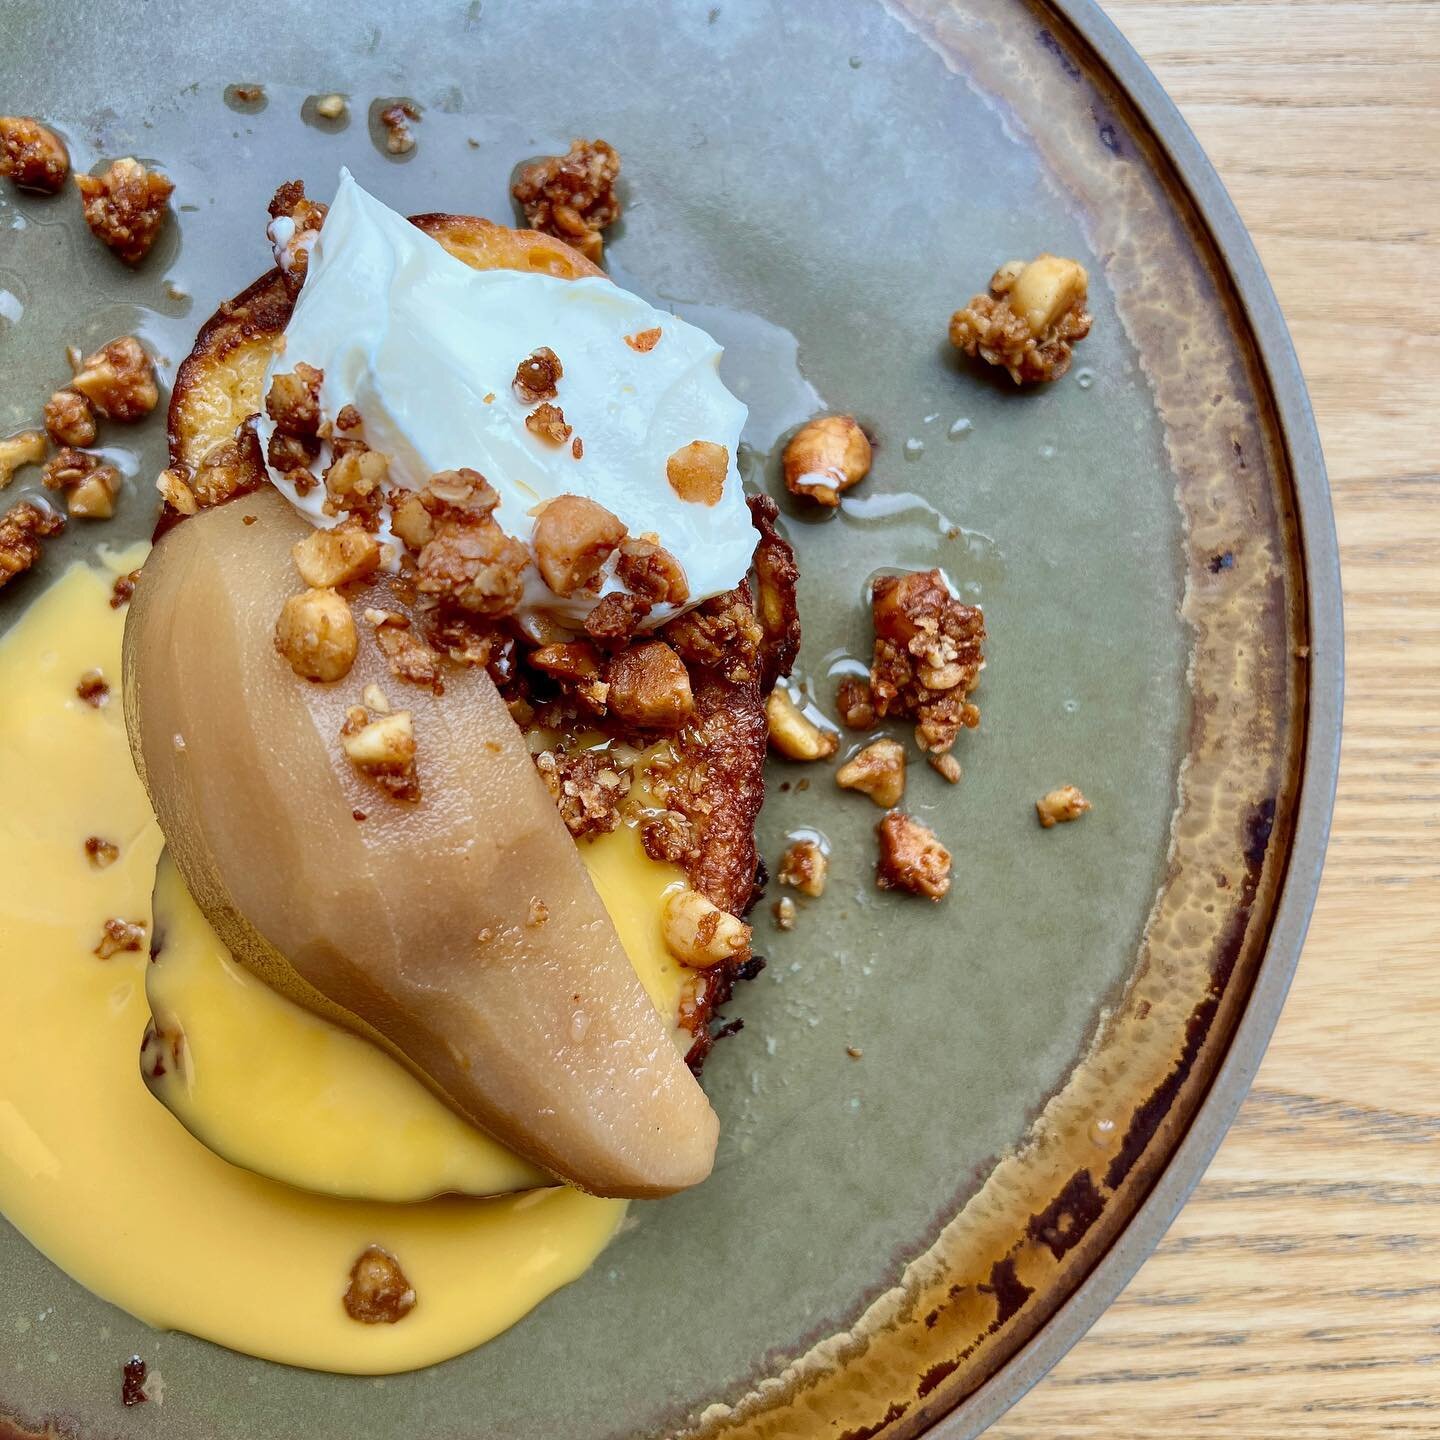 It&rsquo;s time to enjoy the new season of Quince. Our Tsoureki French toast is being served with sweetly braised quince, macadamia crumble and labneh and available in our breakfast and brunch menus!